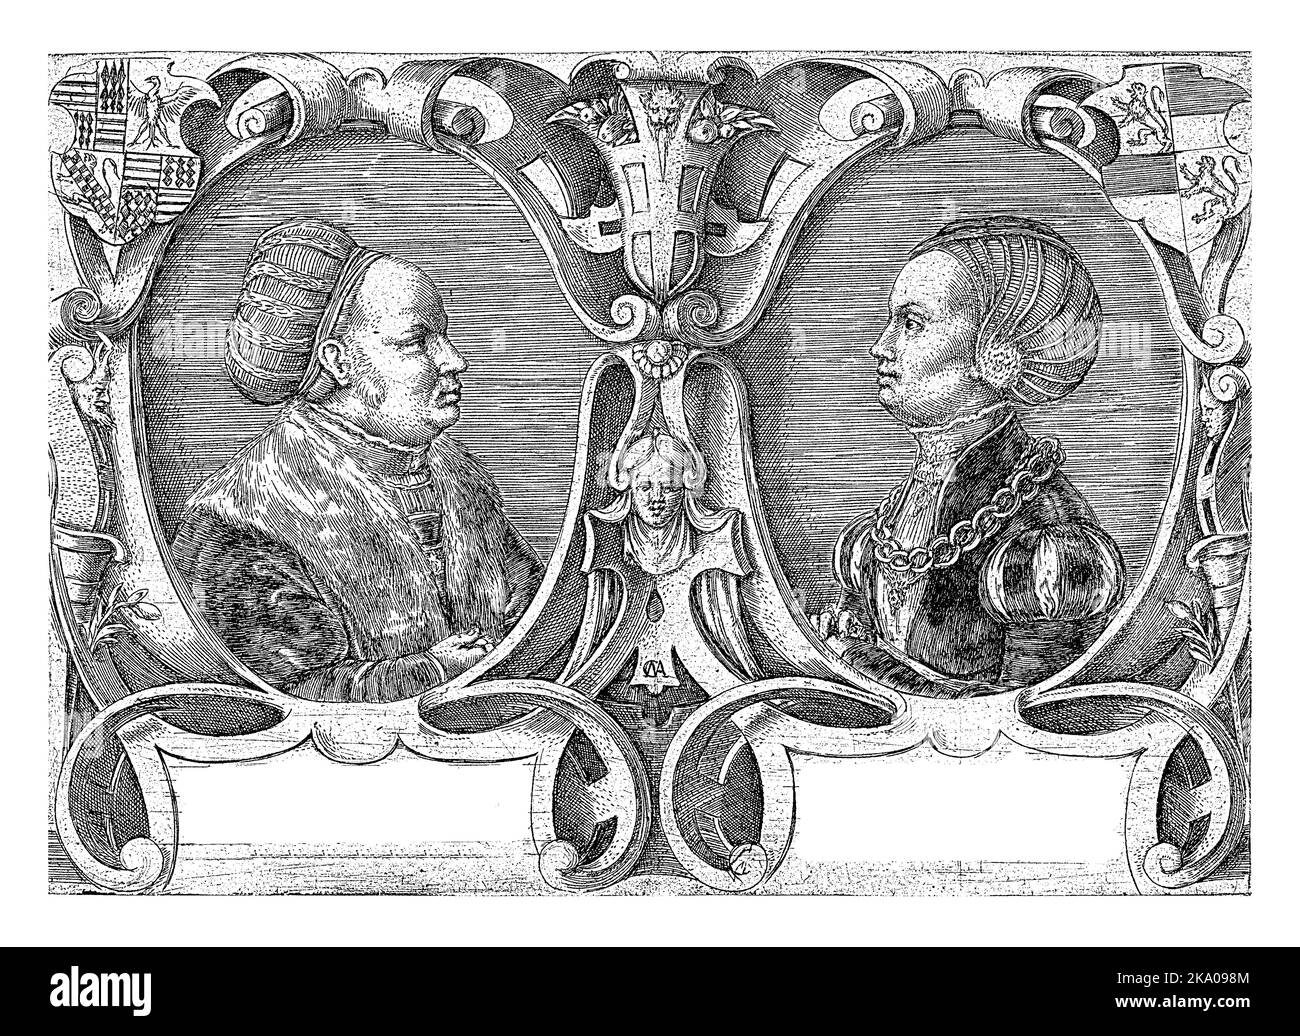 Double portrait of Count Ernst II Mansfeld zu Vorderort and of his second wife Dorothea von Solms-Lich, both in profile. Ornamental frame their person Stock Photo